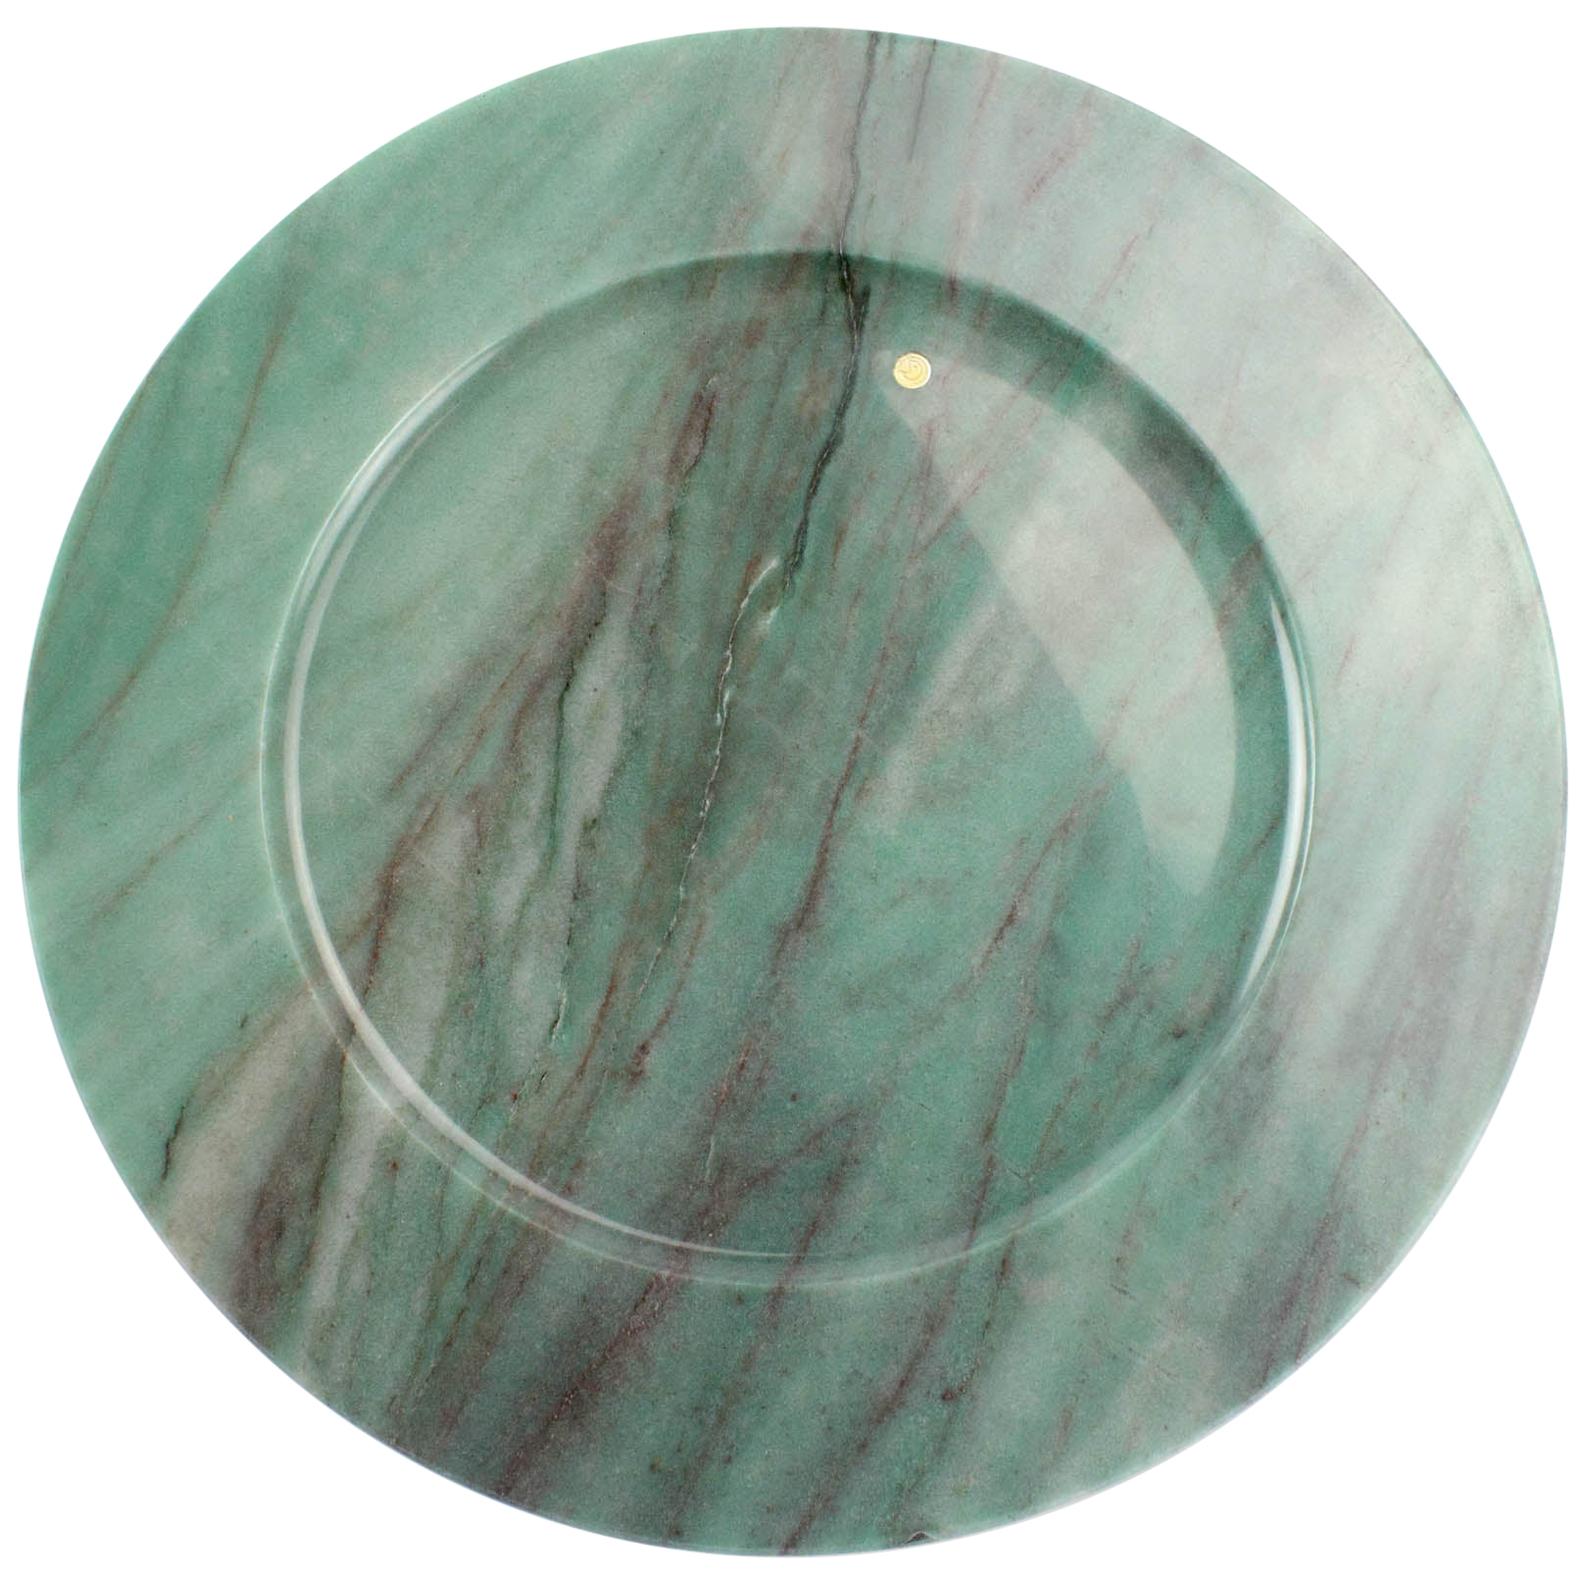 Charger Plate Platters Serveware Set of 6 Green Quartzite Marble Handmade Italy